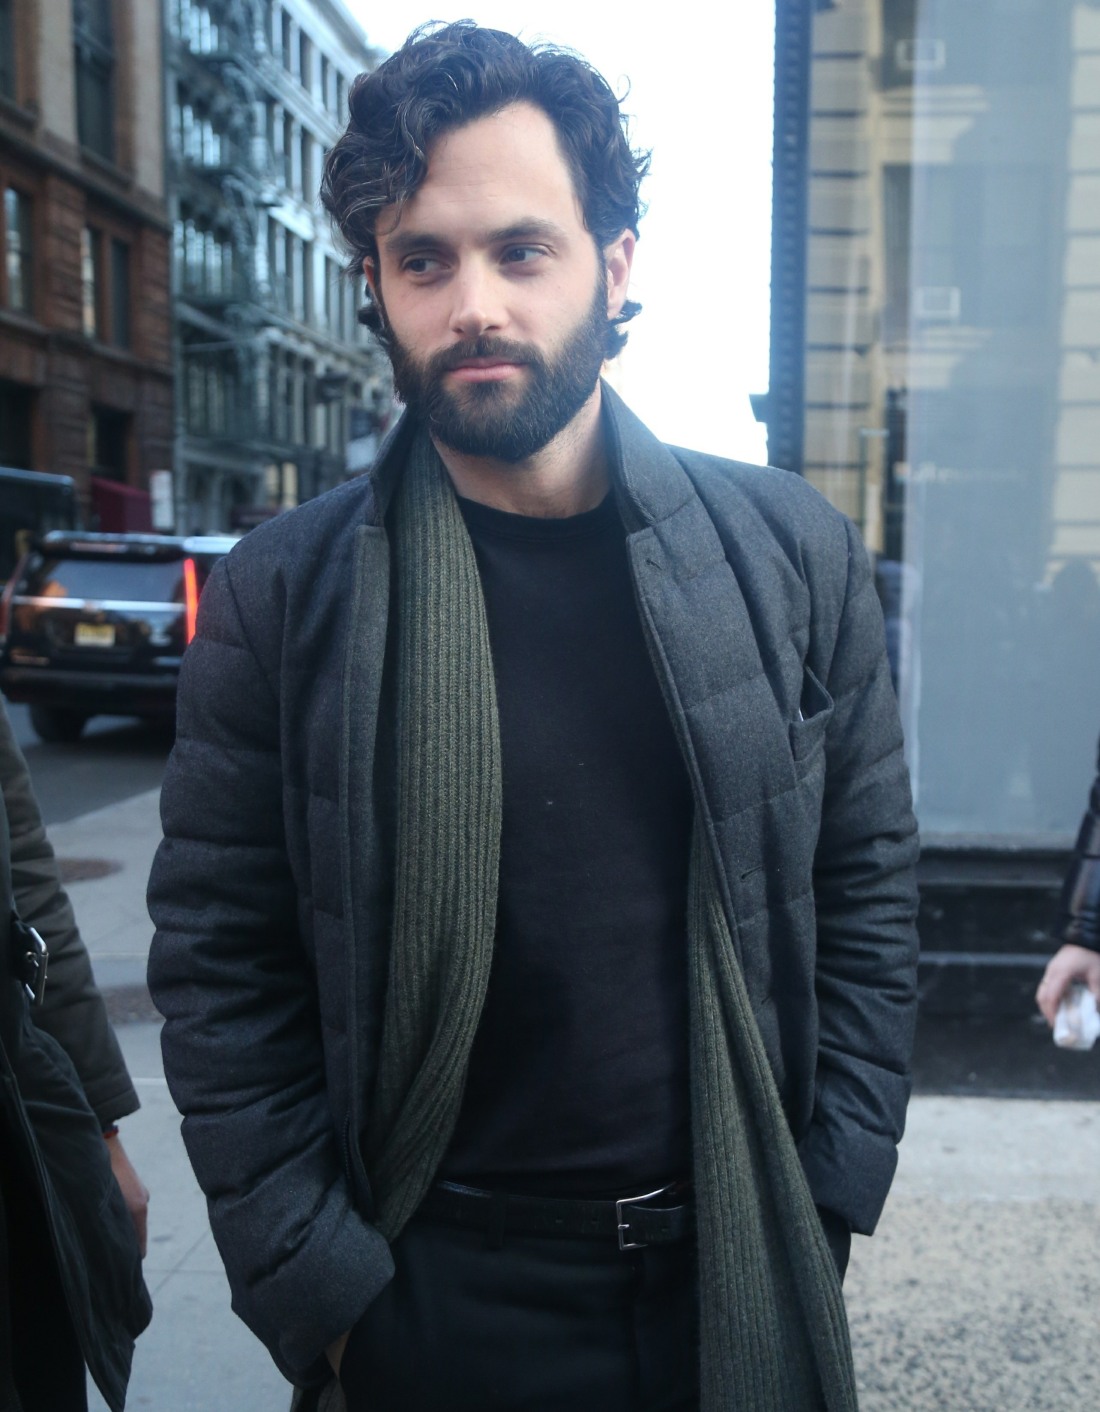 'You' star Penn Badgley all bundled up in NYC